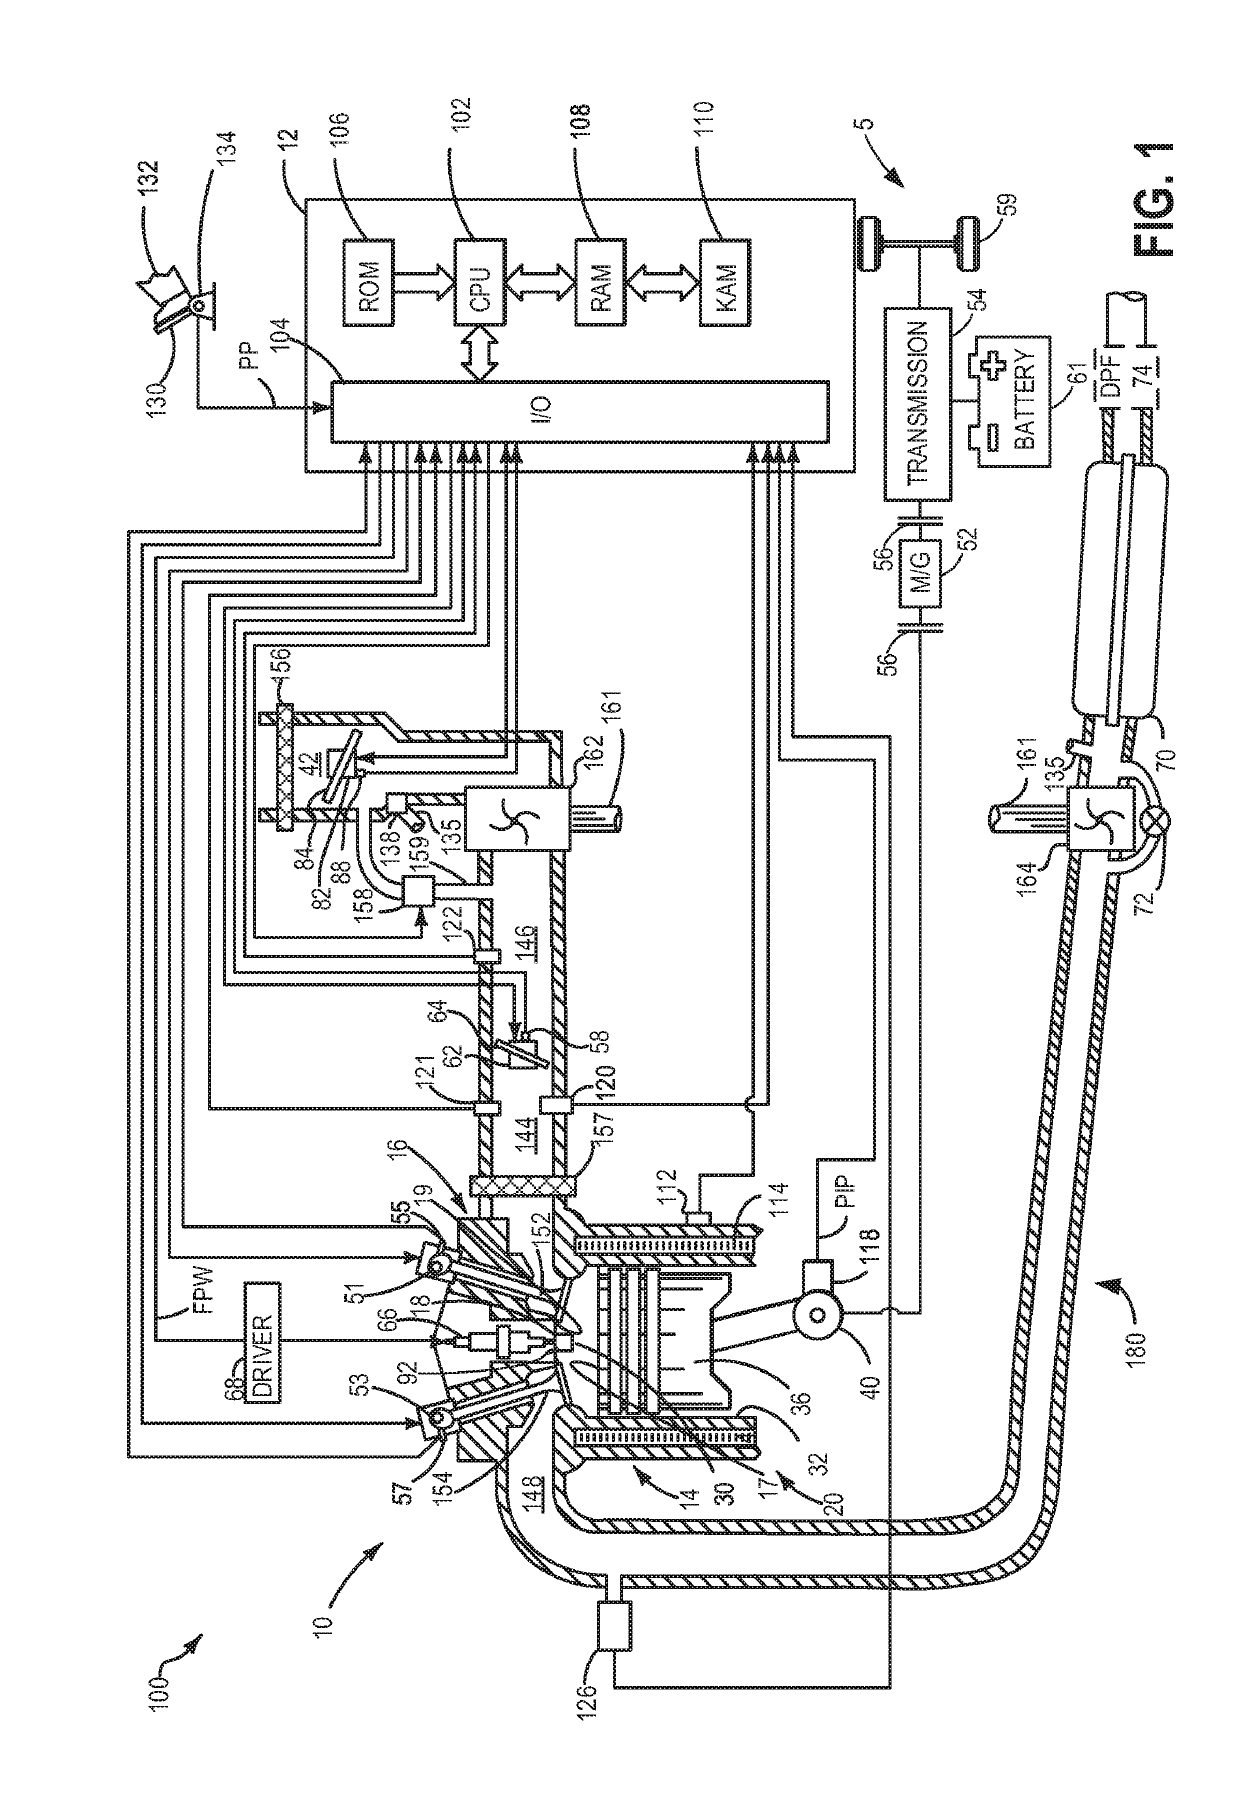 Methods and systems for a fuel injector